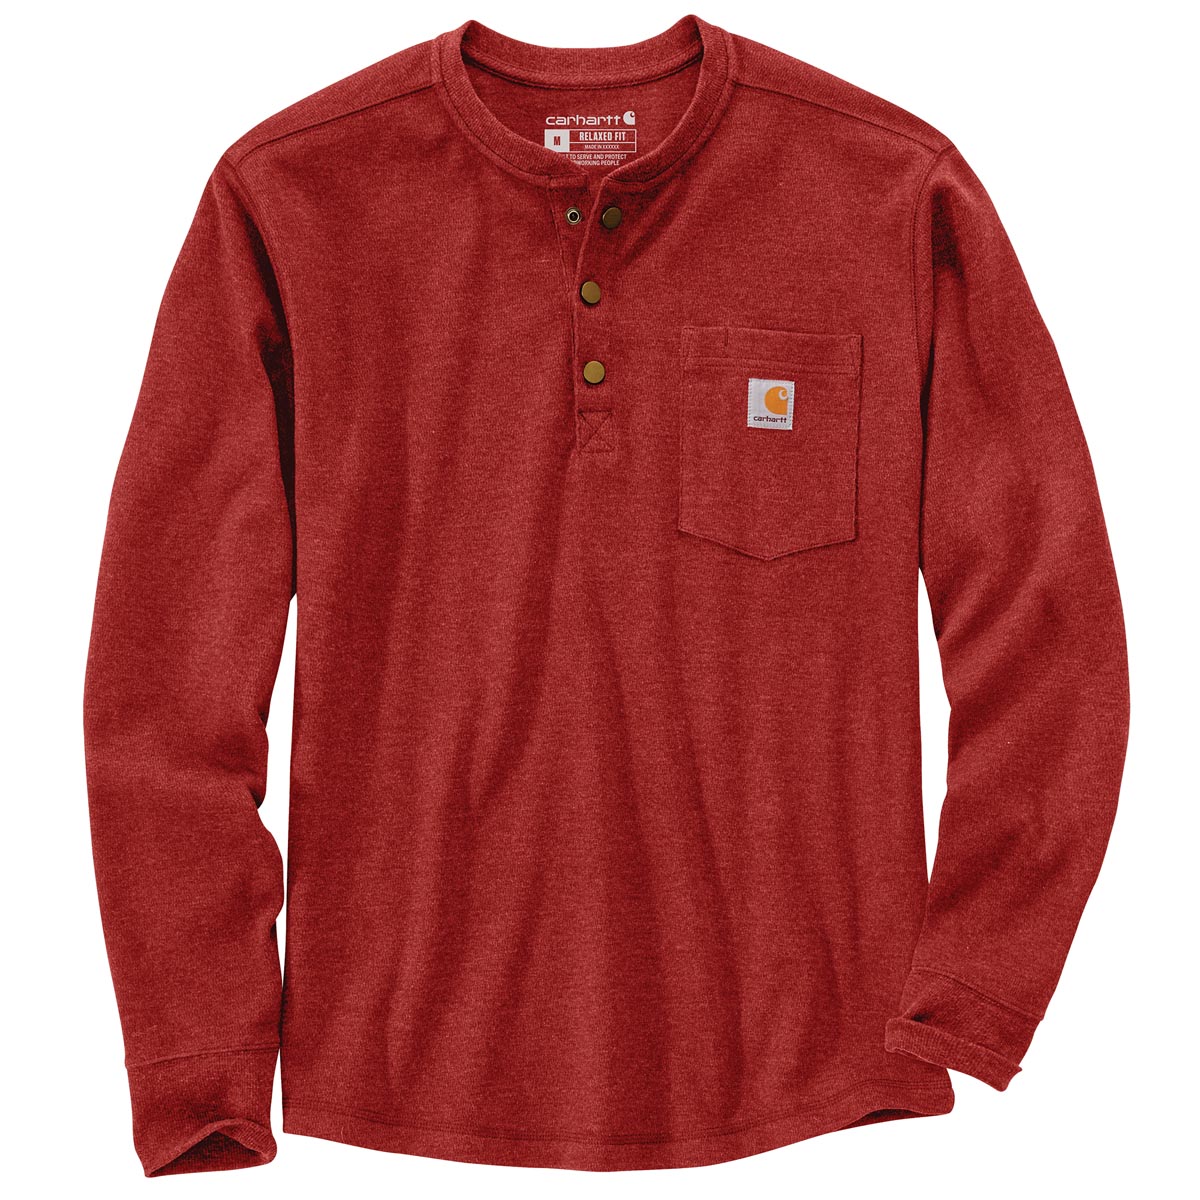 mythologie Trottoir Eenvoud Carhartt Men's Relaxed Fit Heavyweight LS Henley Pocket Thermal T-Shirt -  Discontinued Pricing